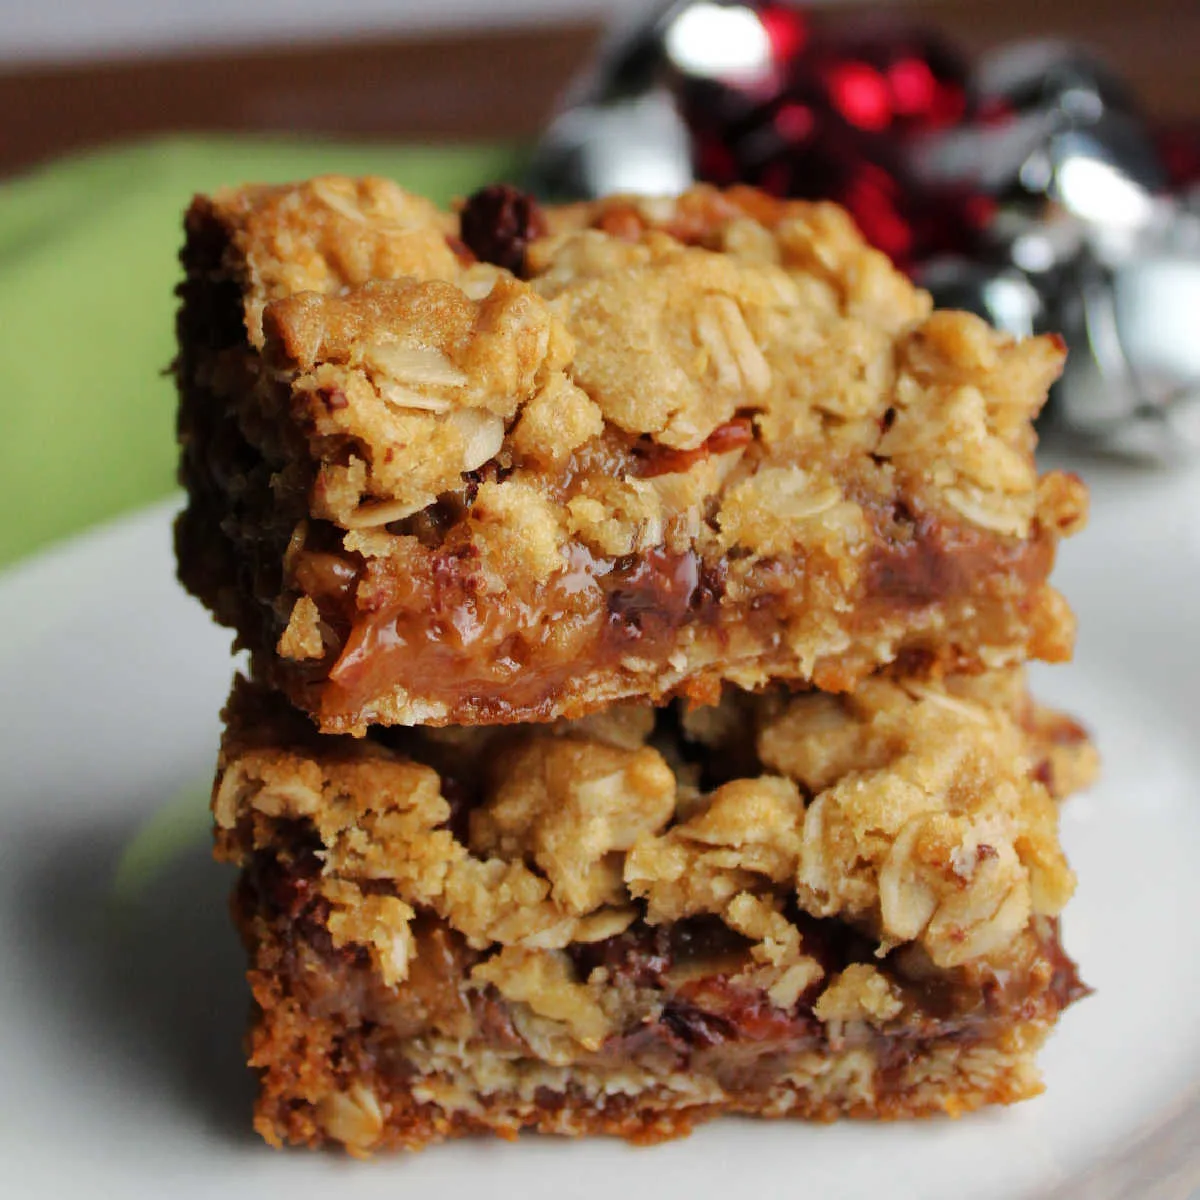 Stack of cookie bars with oatmeal crust and gooey caramel, chocolate and pecan centers.